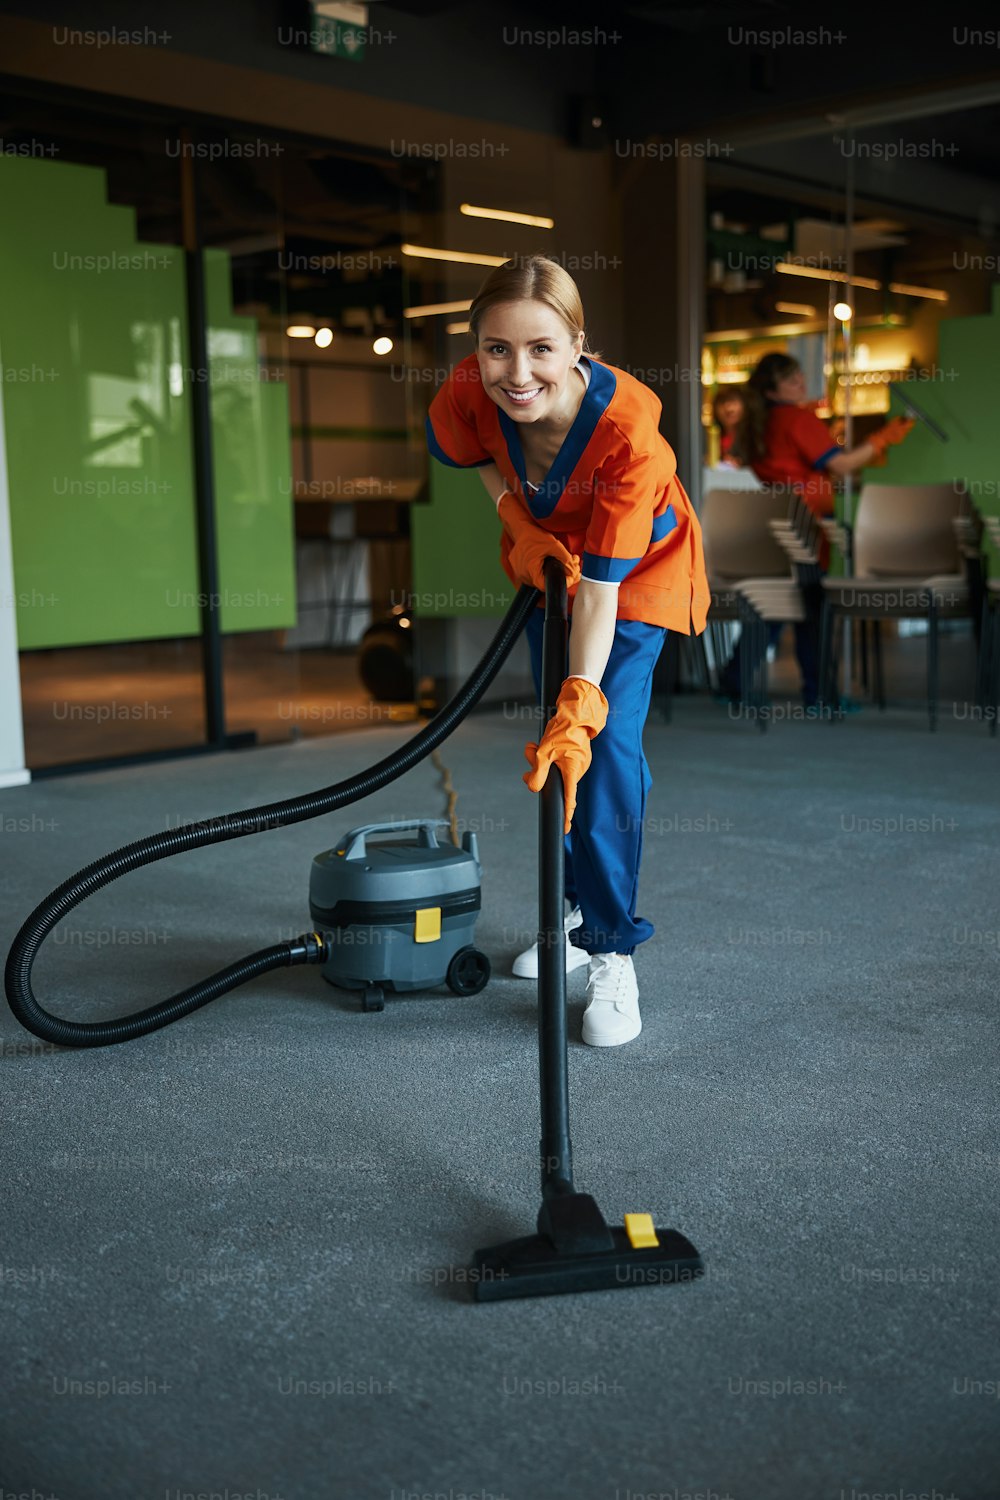 Joyous female worker in the uniform using the corded bagless canister vacuum cleaner during the clean-up